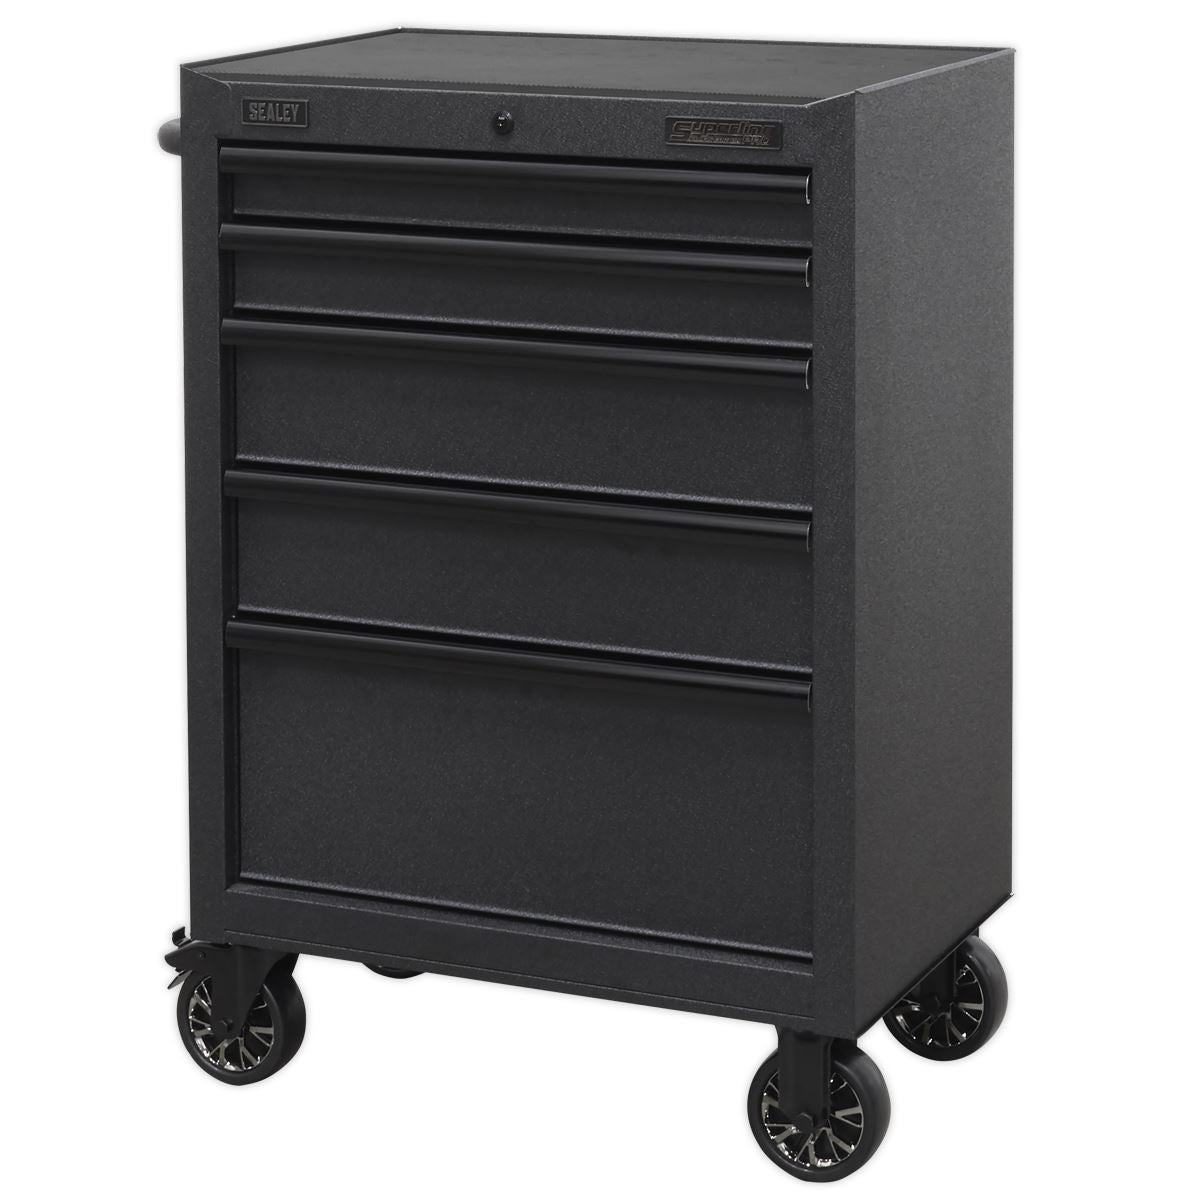 Sealey Superline Pro Rollcab 5 Drawer 680mm with Soft Close Drawers